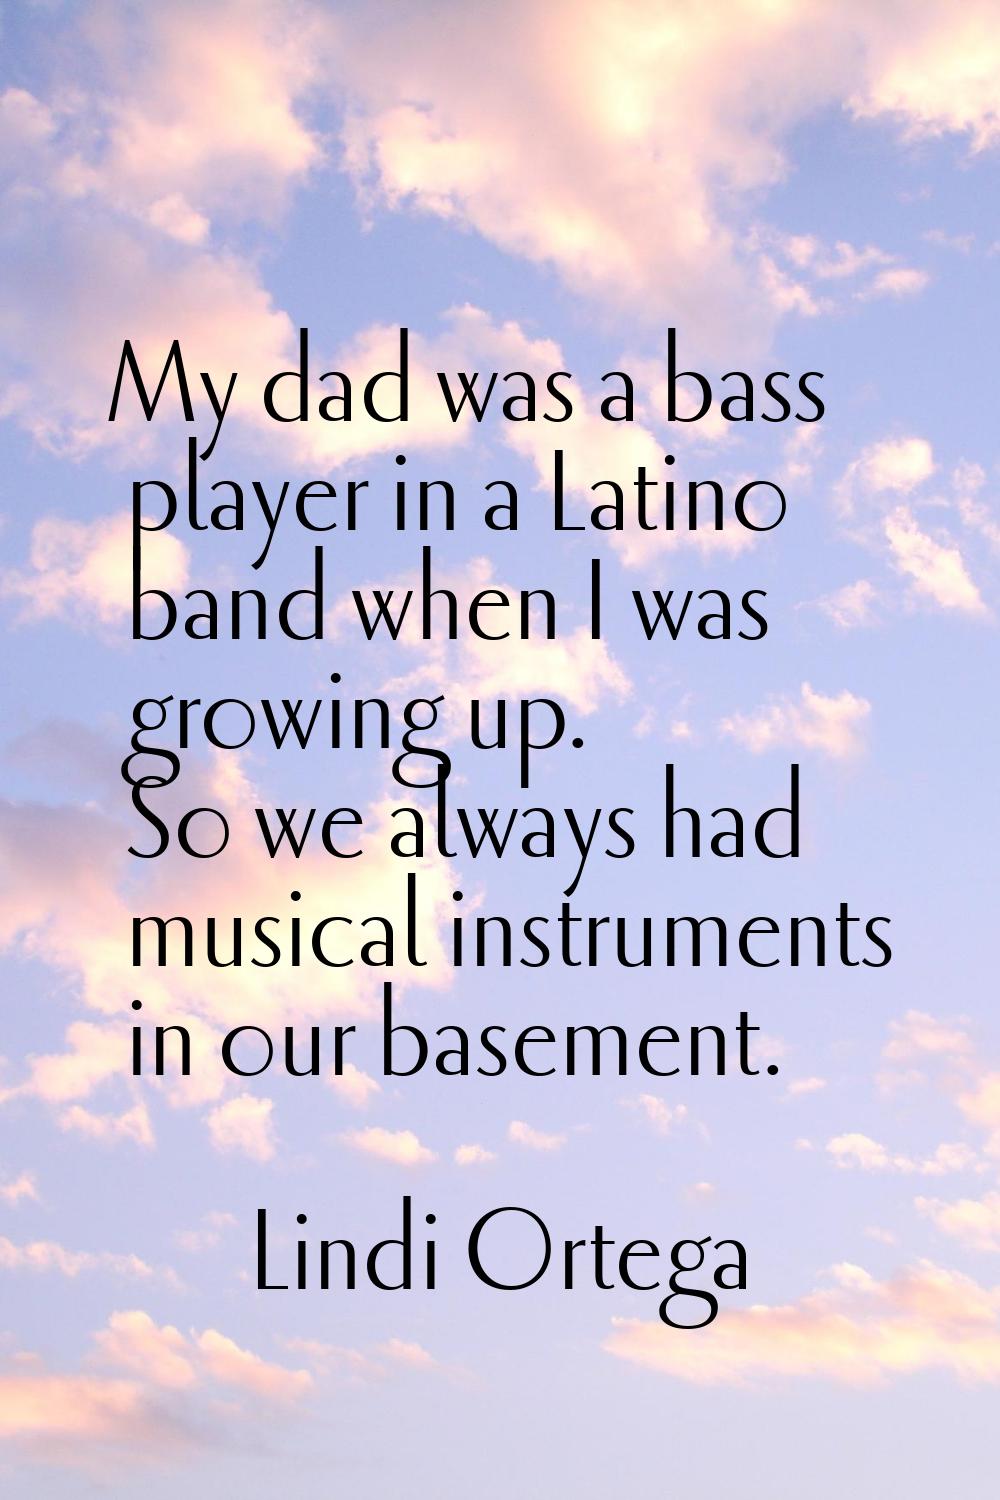 My dad was a bass player in a Latino band when I was growing up. So we always had musical instrumen